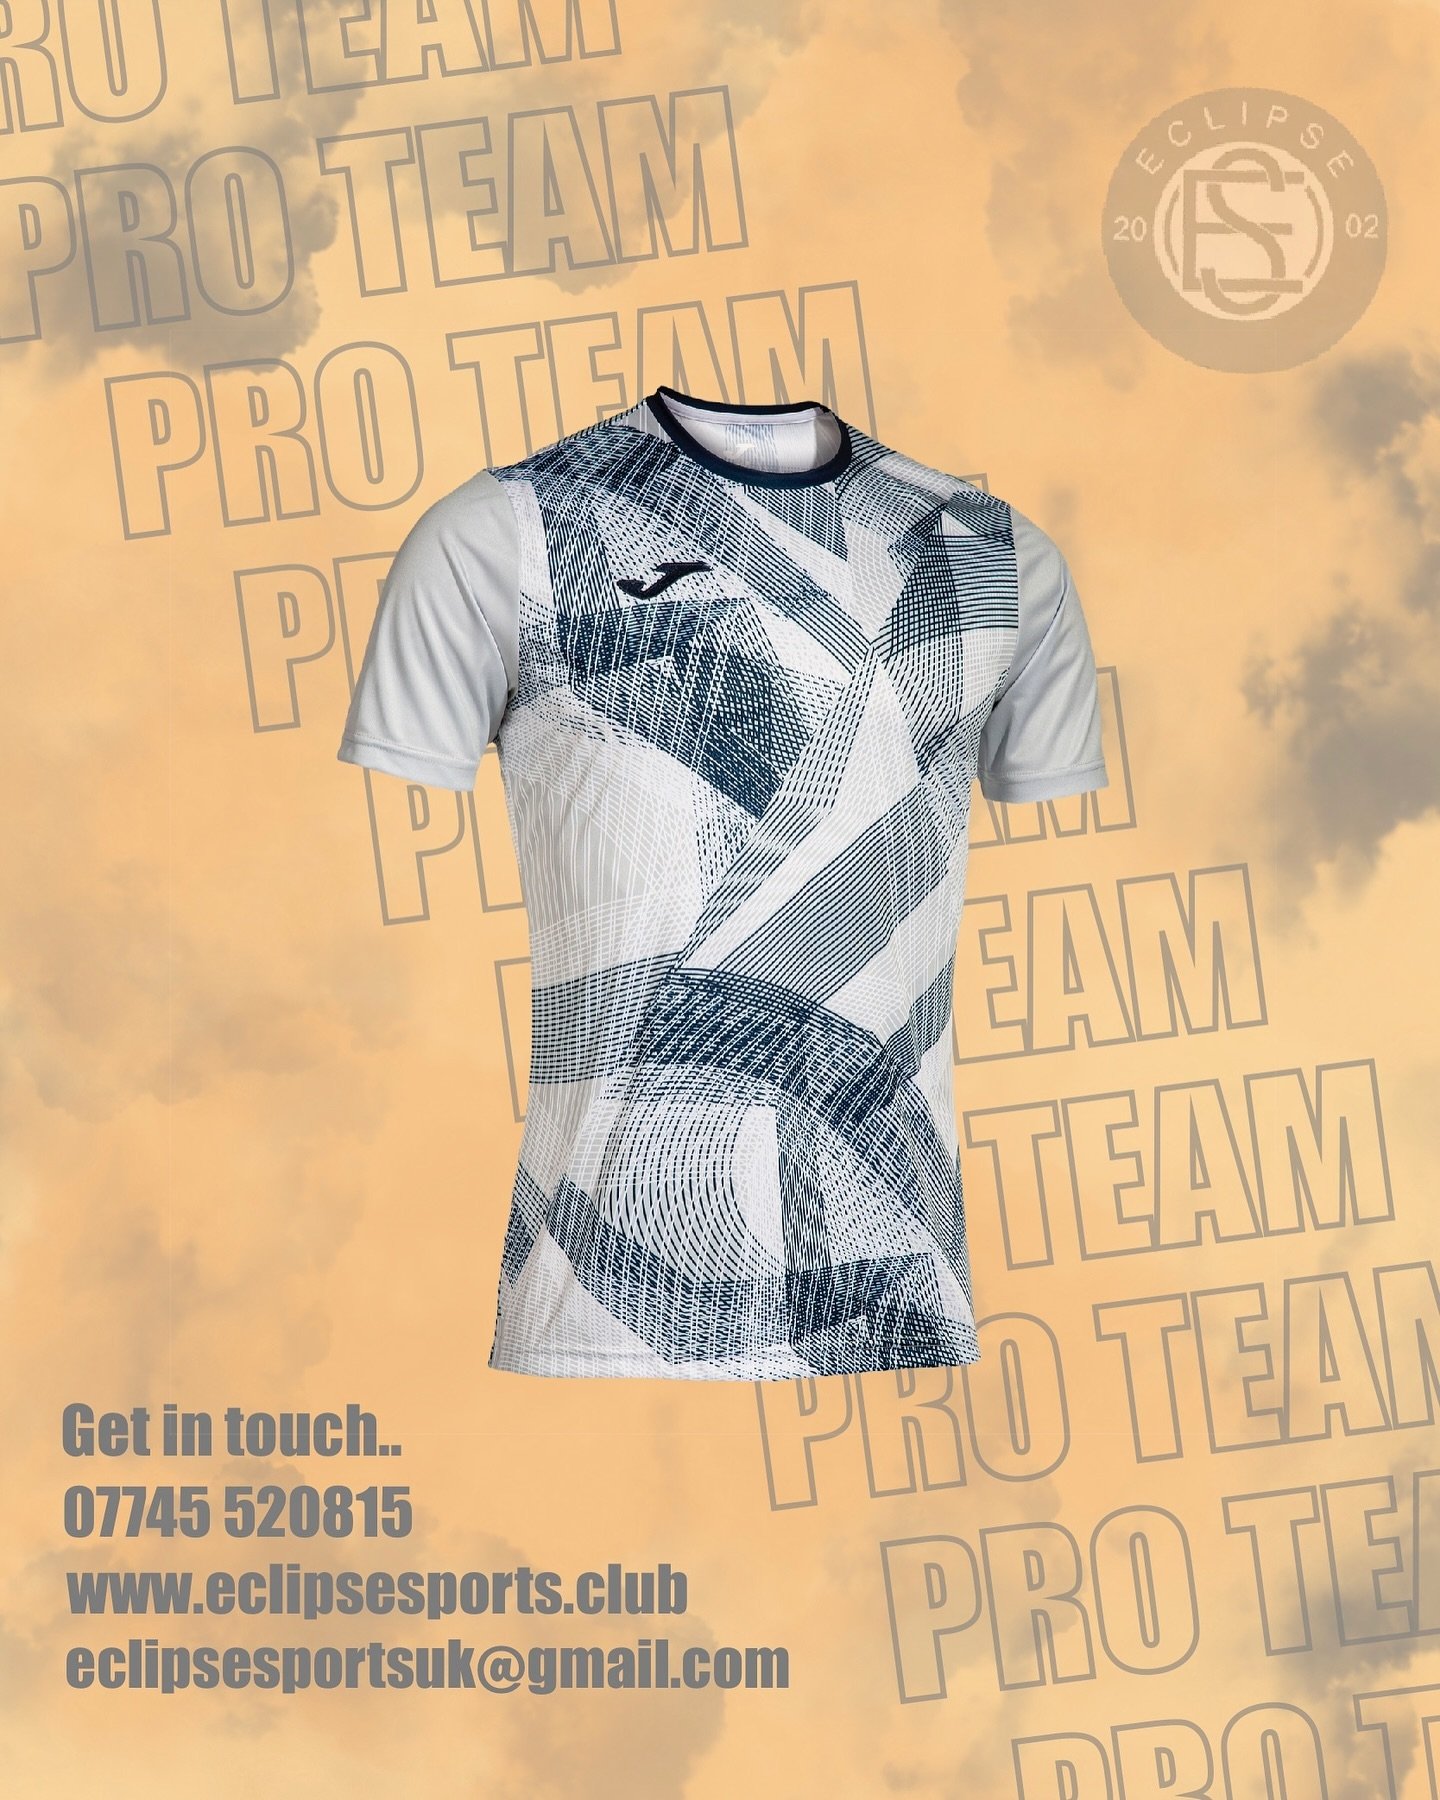 Great quality.. great price.. great service.. Get in touch ready for next season! ⚽️

#footballkits